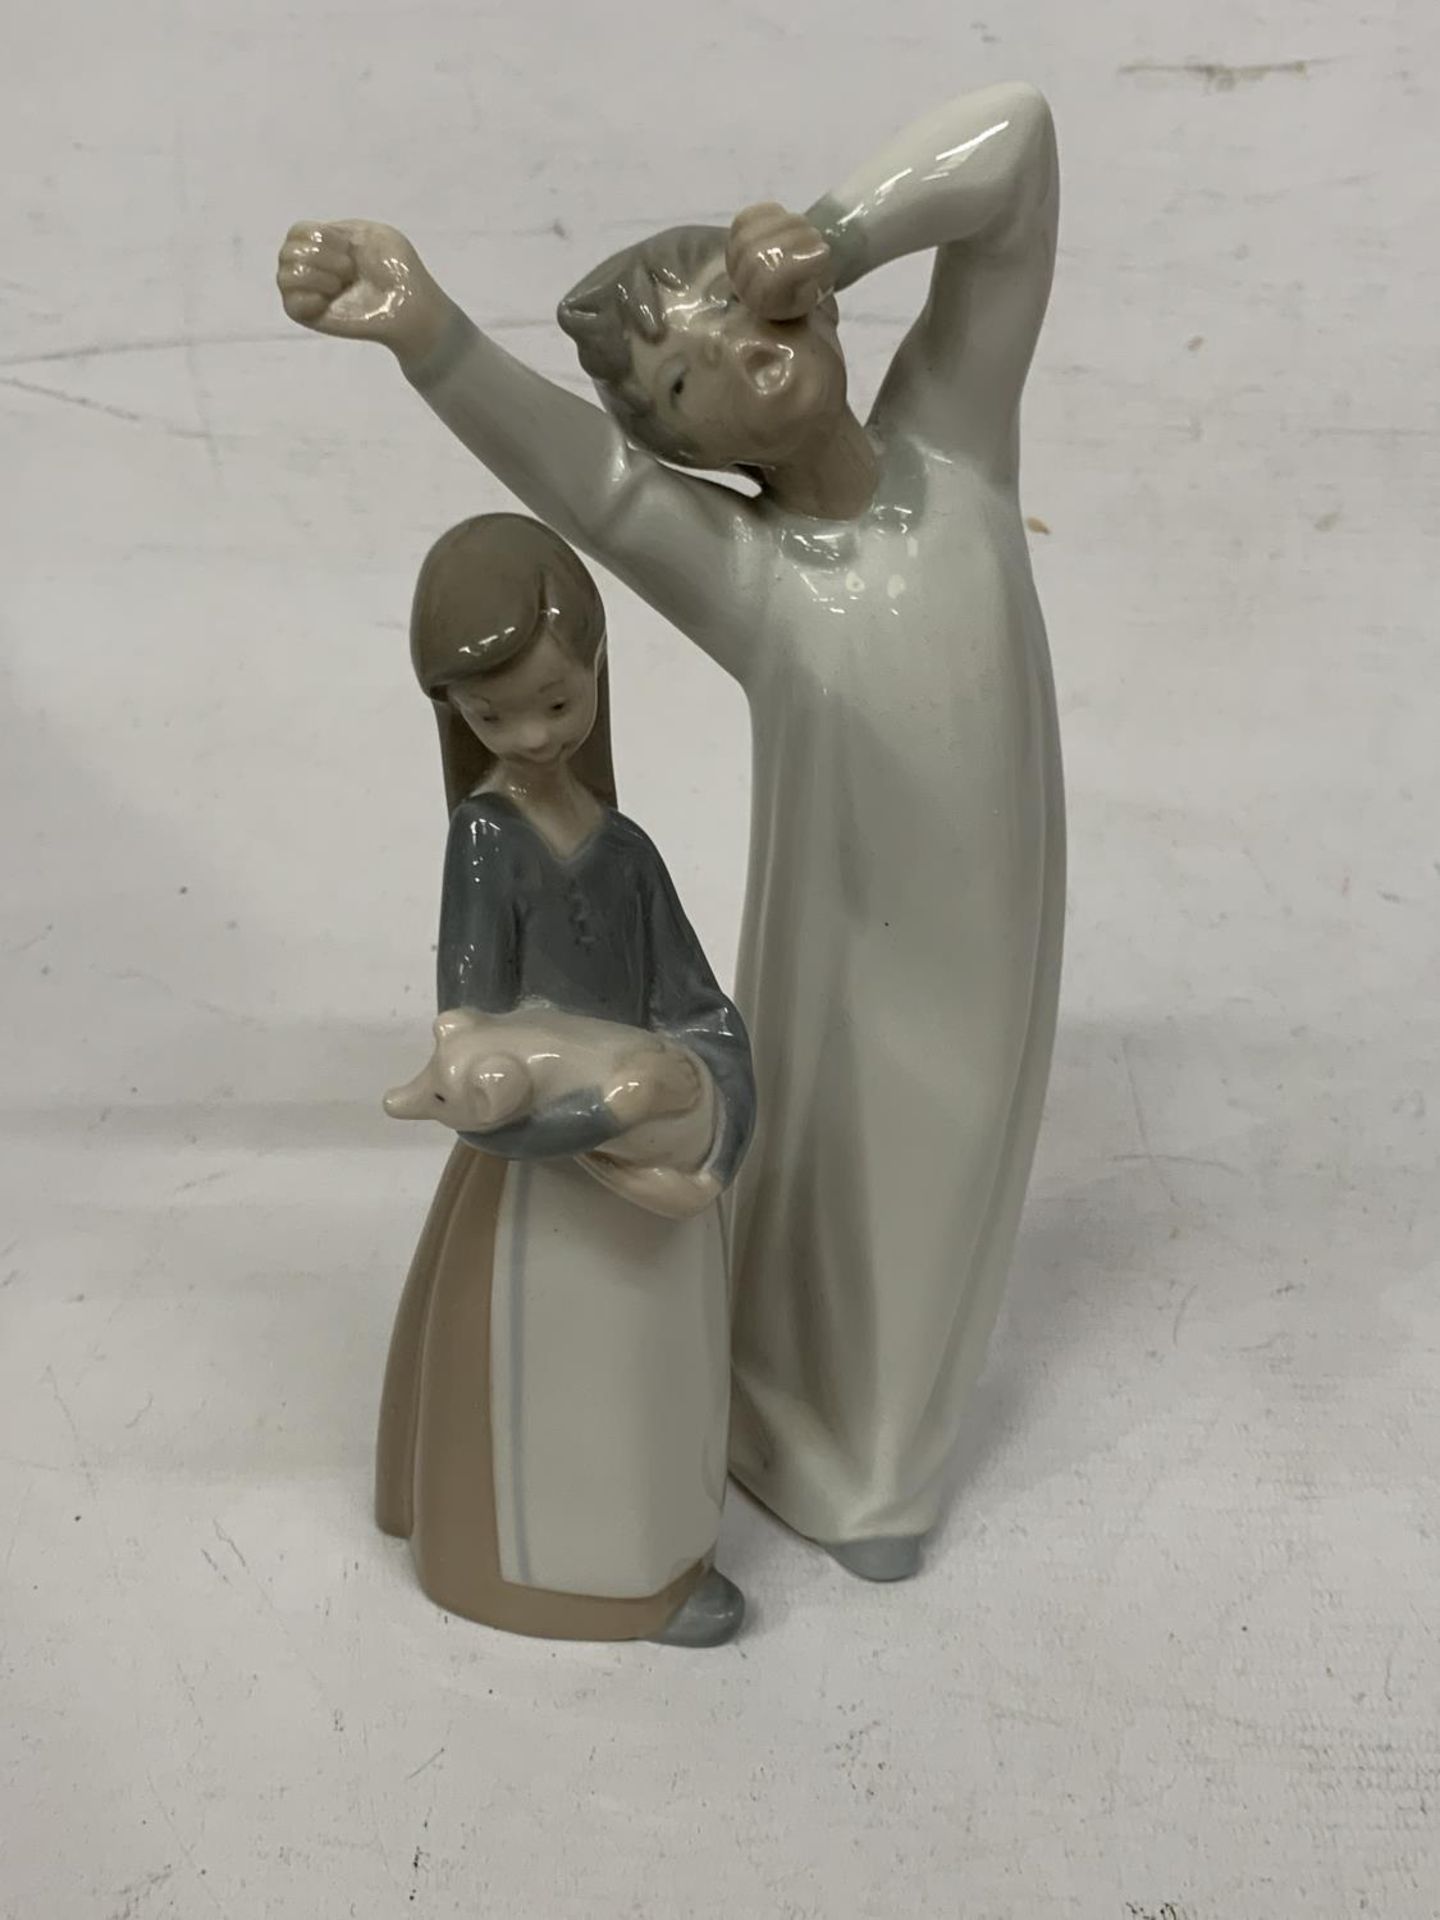 TWO LLADRO FIGURES - BOY YAWNING IN A NIGHTGOWN AND A GIRL HOLDING A PIG